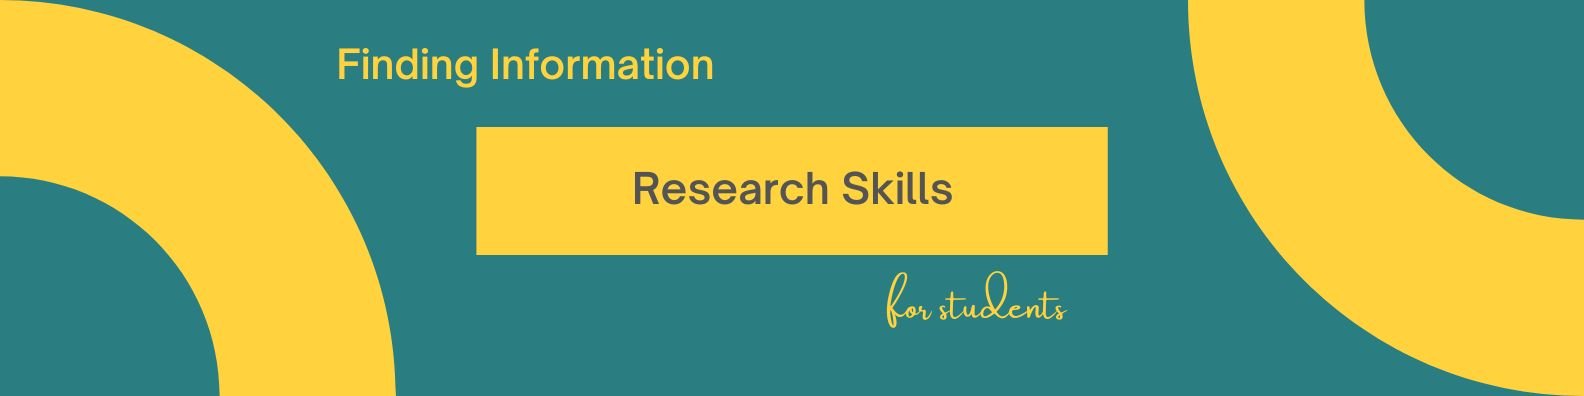 research skills for students by tim o'sullivan